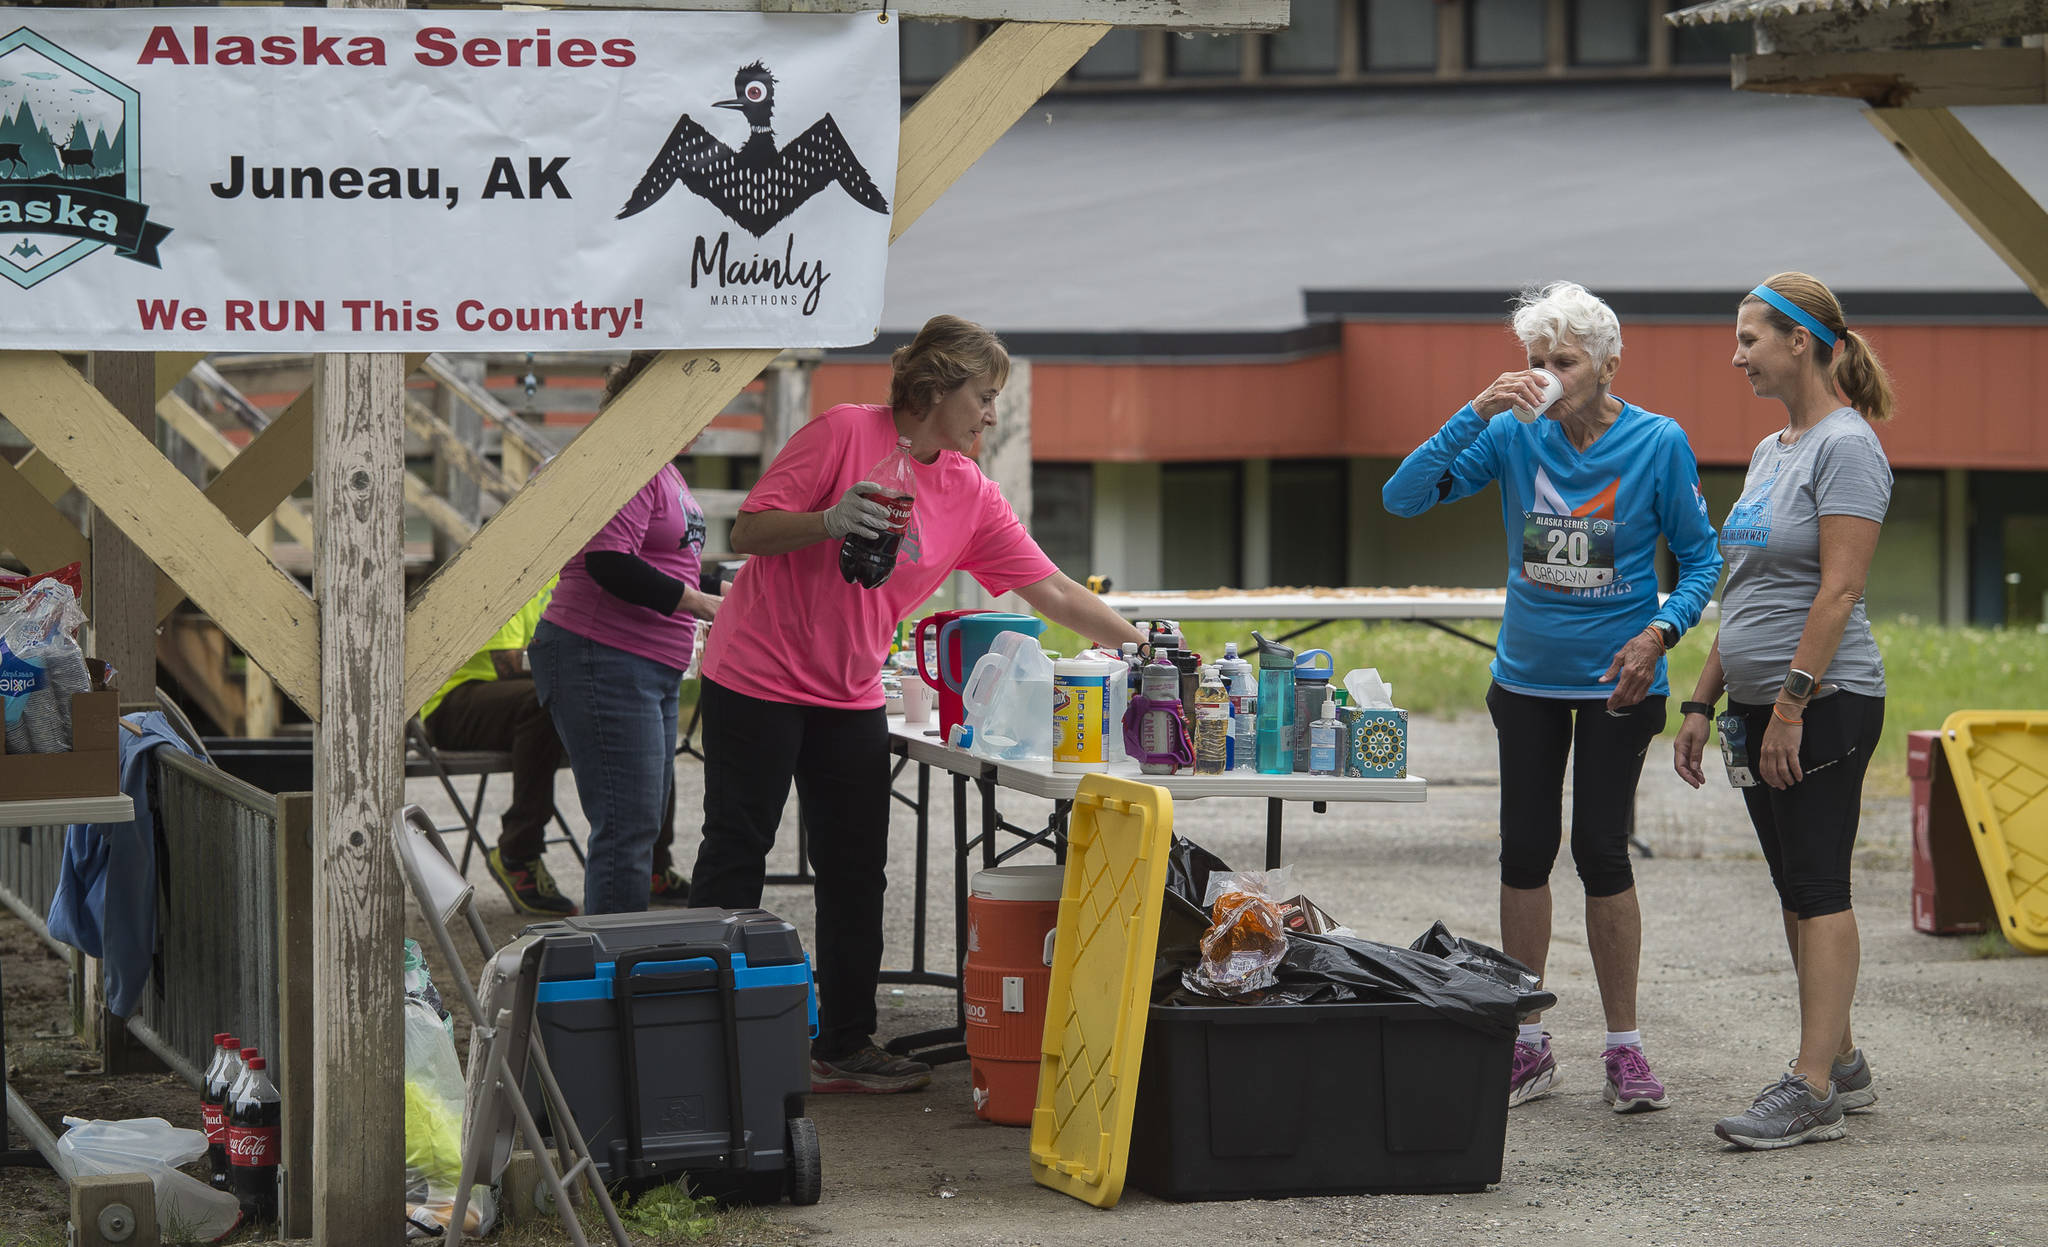 Carolyn Mitchell and her daughter, Connie Deverill, stop to drink and eat something during a marathon coordinated by Mainly Marathons at Mendenhall River Community School on Thursday, July 26, 2018. For Mitchell, 81, it was her 175th marathon. (Michael Penn | Juneau Empire)